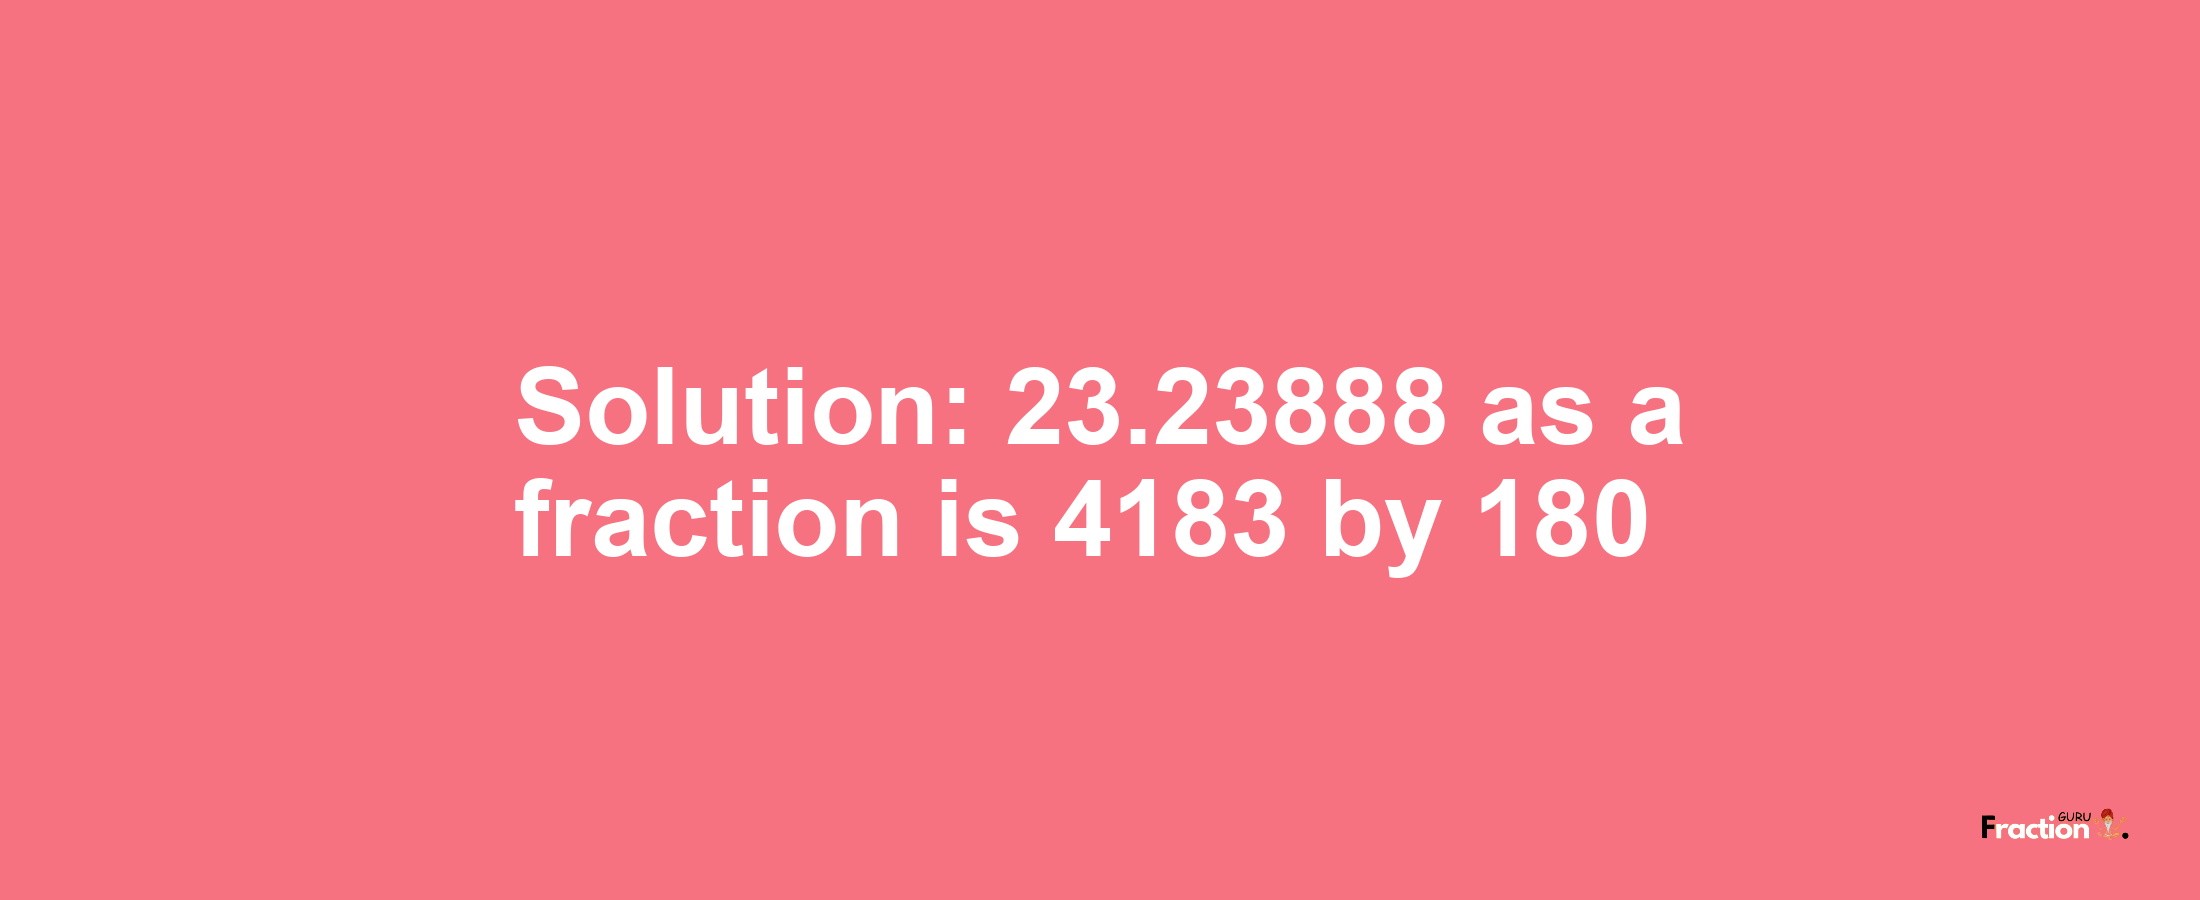 Solution:23.23888 as a fraction is 4183/180